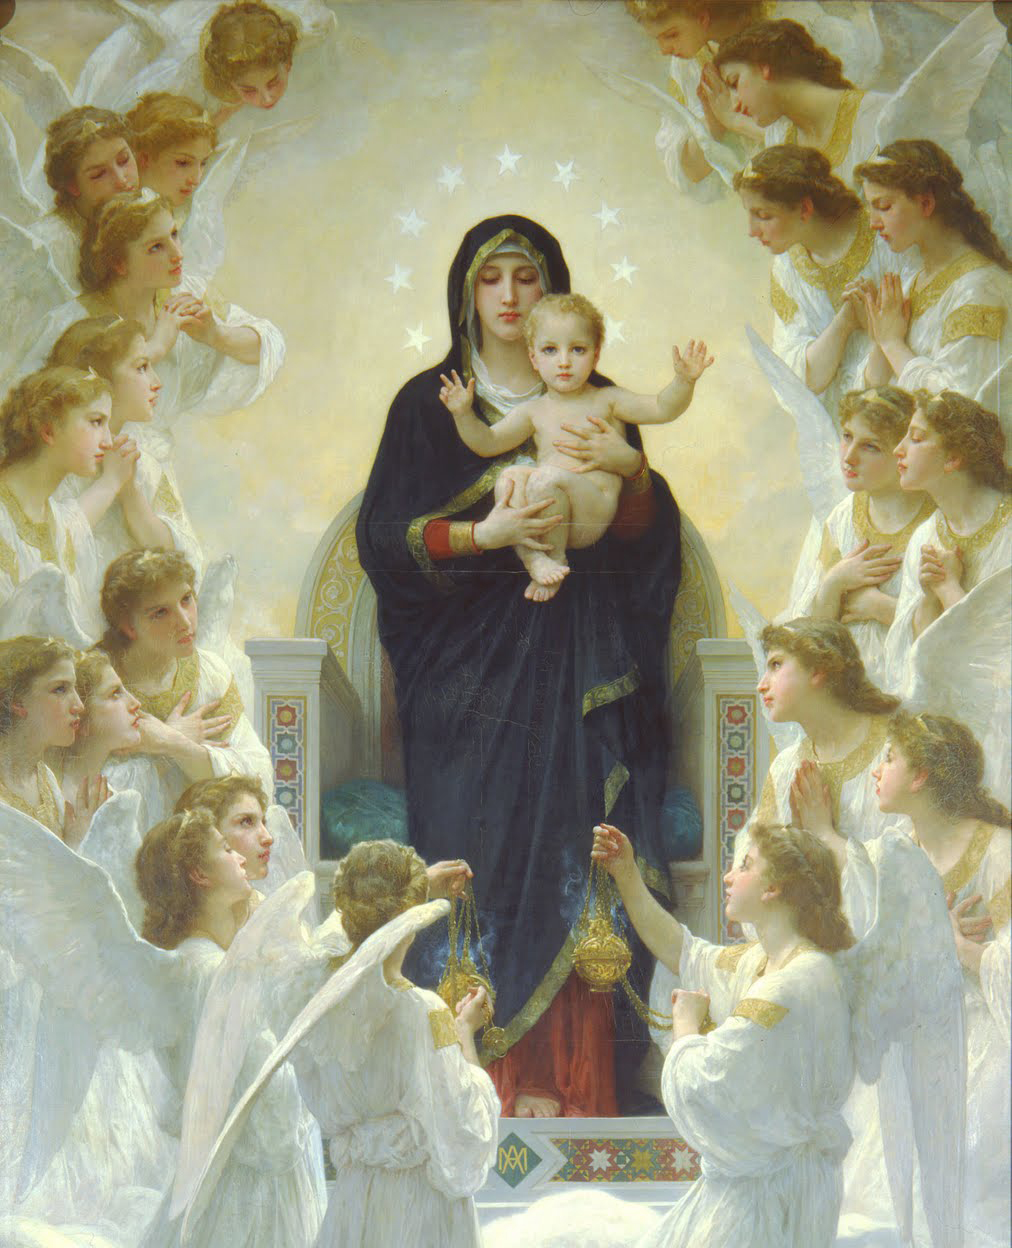 Our Lady of the Angels, Mary holding Jesus surrounded by angels